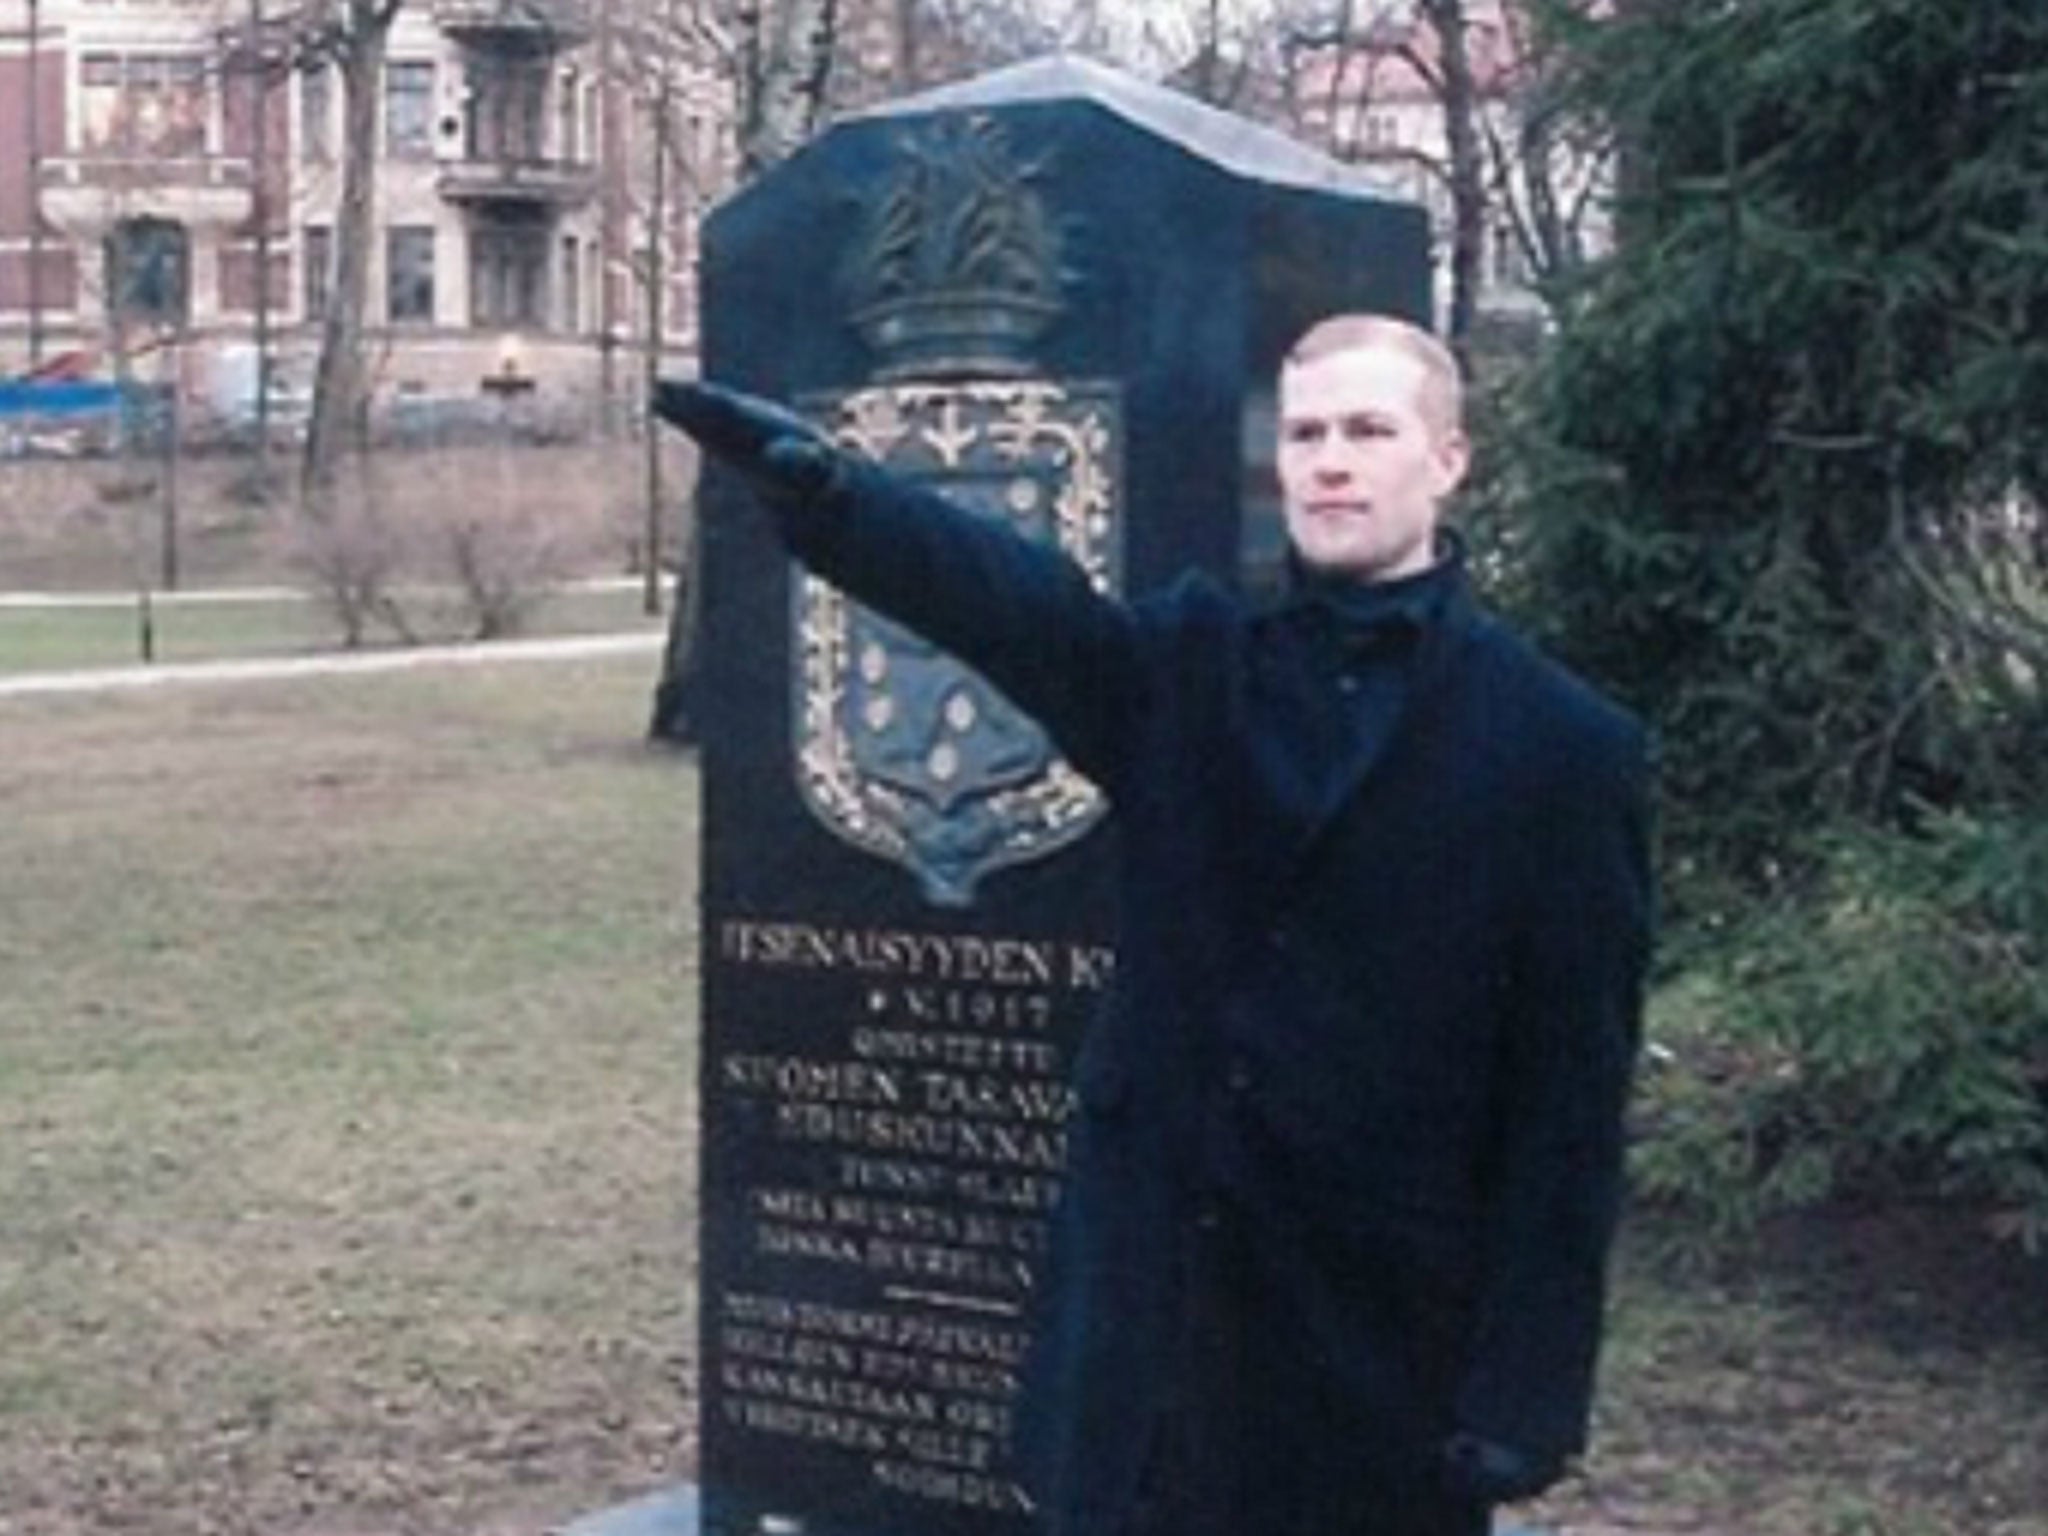 Mikko Vehvilainen, who was born in Finland, performing a Nazi salute